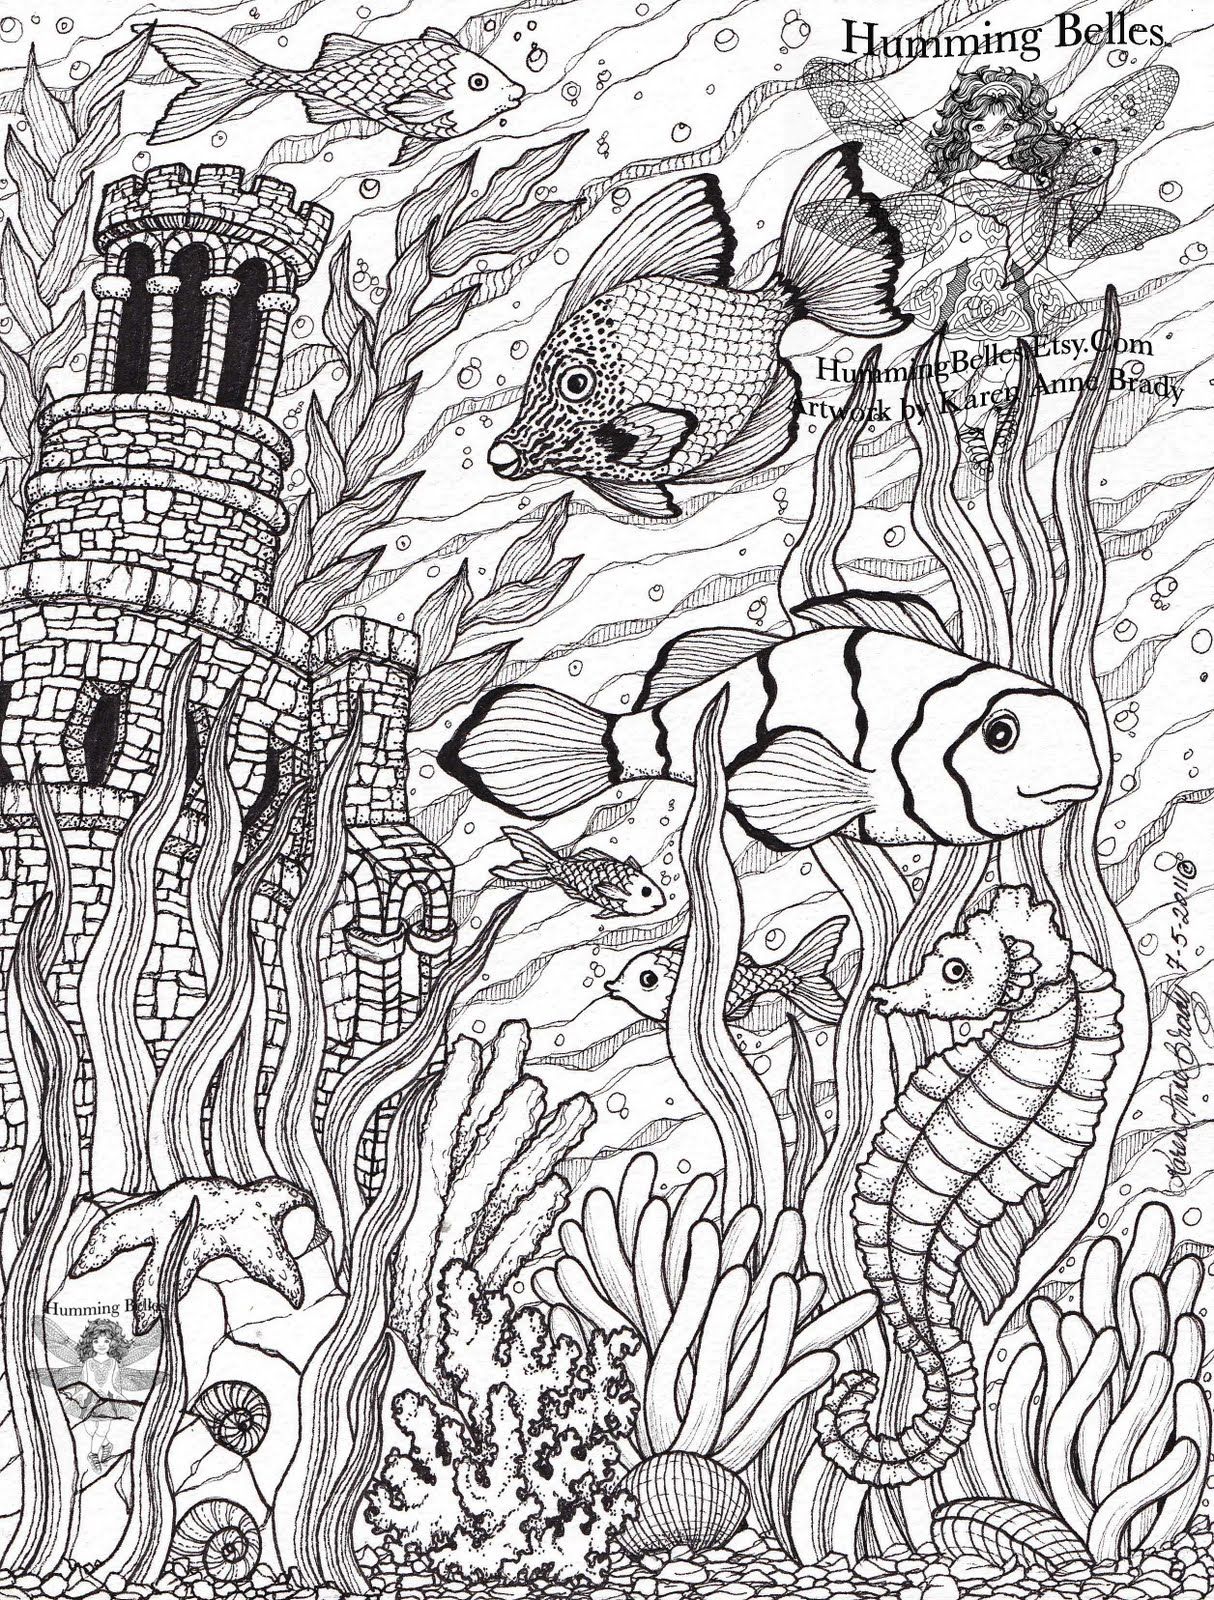 Humming Belles".....: New! Undersea Illustrations and Coloring Pages